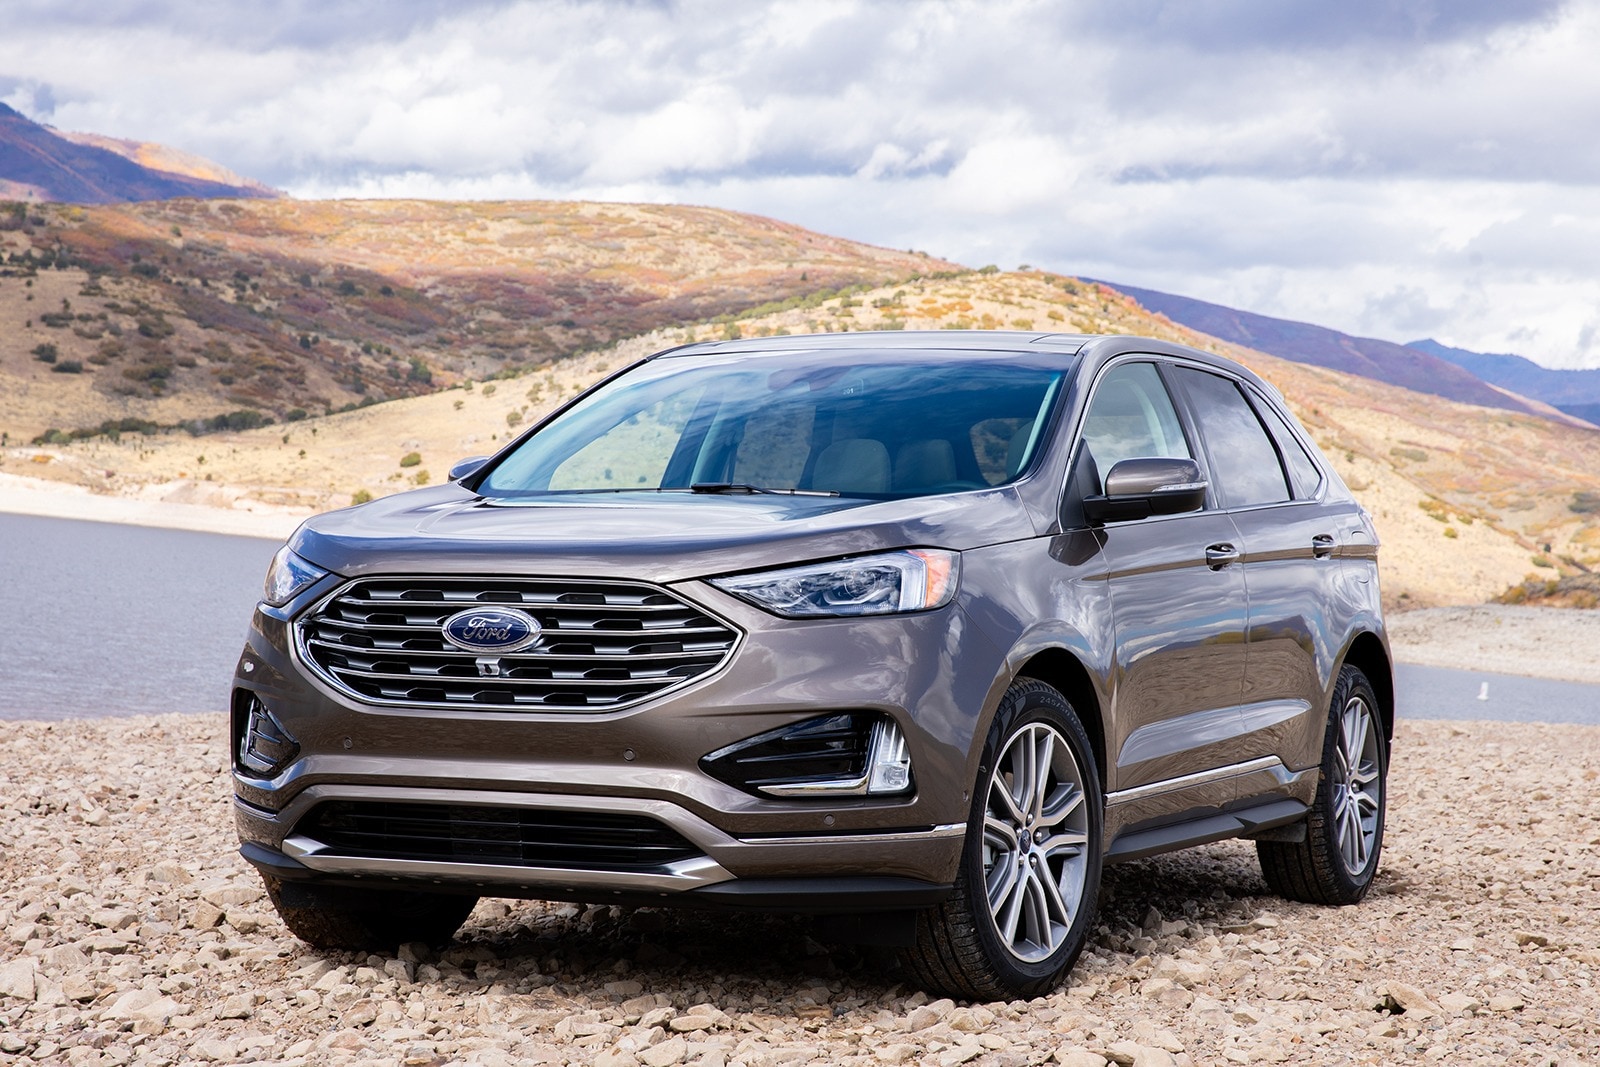 2019 Ford Edge Review & Ratings